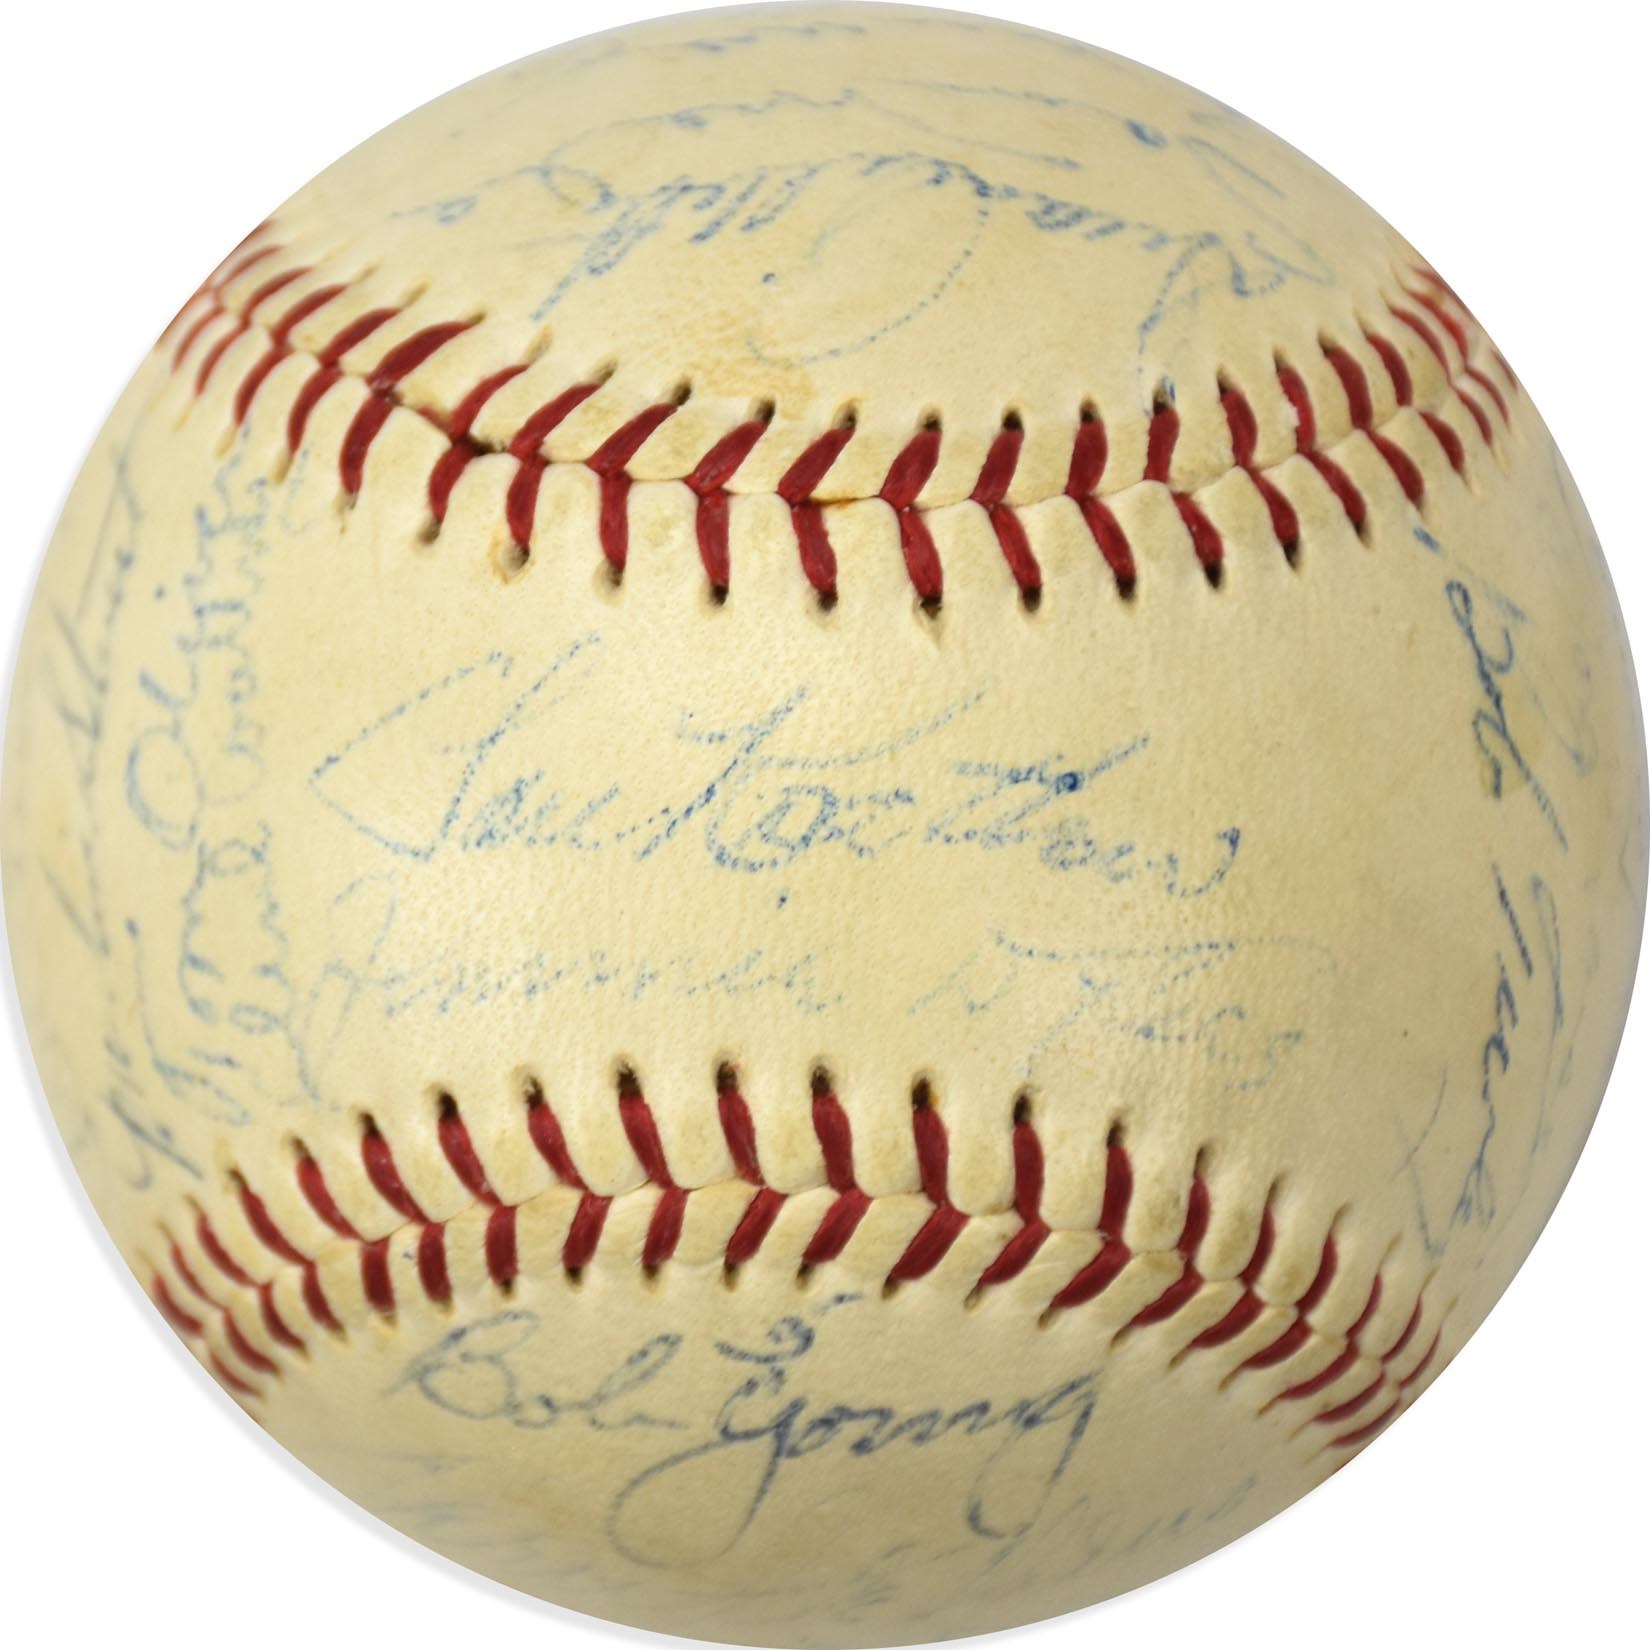 Baseball Autographs - 1954 Baltimore Orioles Team-Signed Baseball - First Year In Major Leagues (PSA)